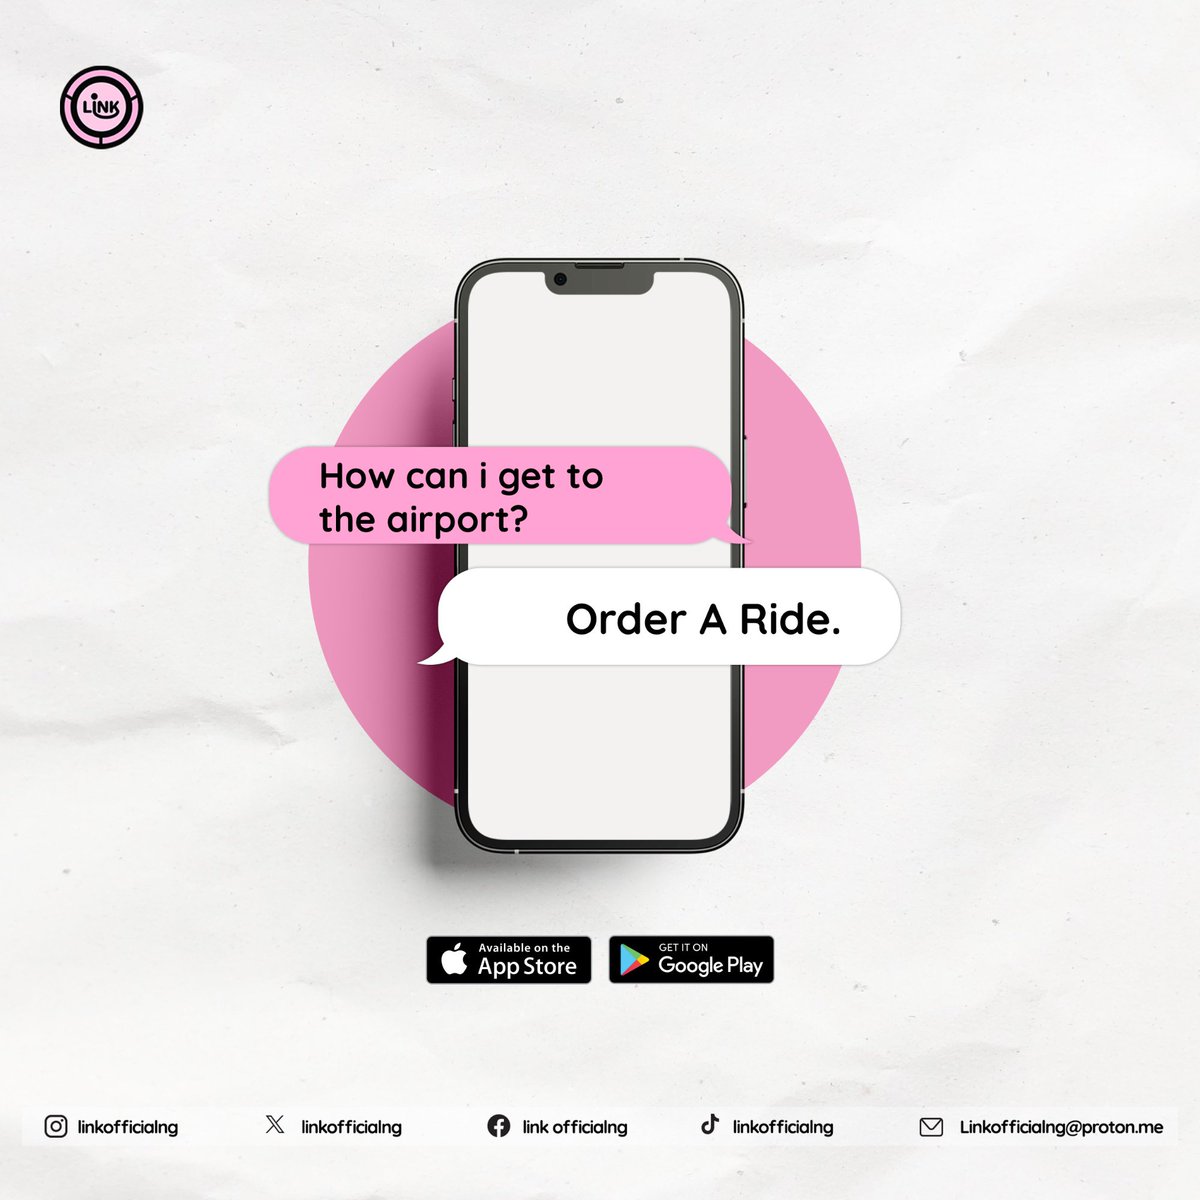 Instead of trekking round Abuja, order a ride from LinkRide. Download LinkRide from your appstore/playstore. @linkofficialng